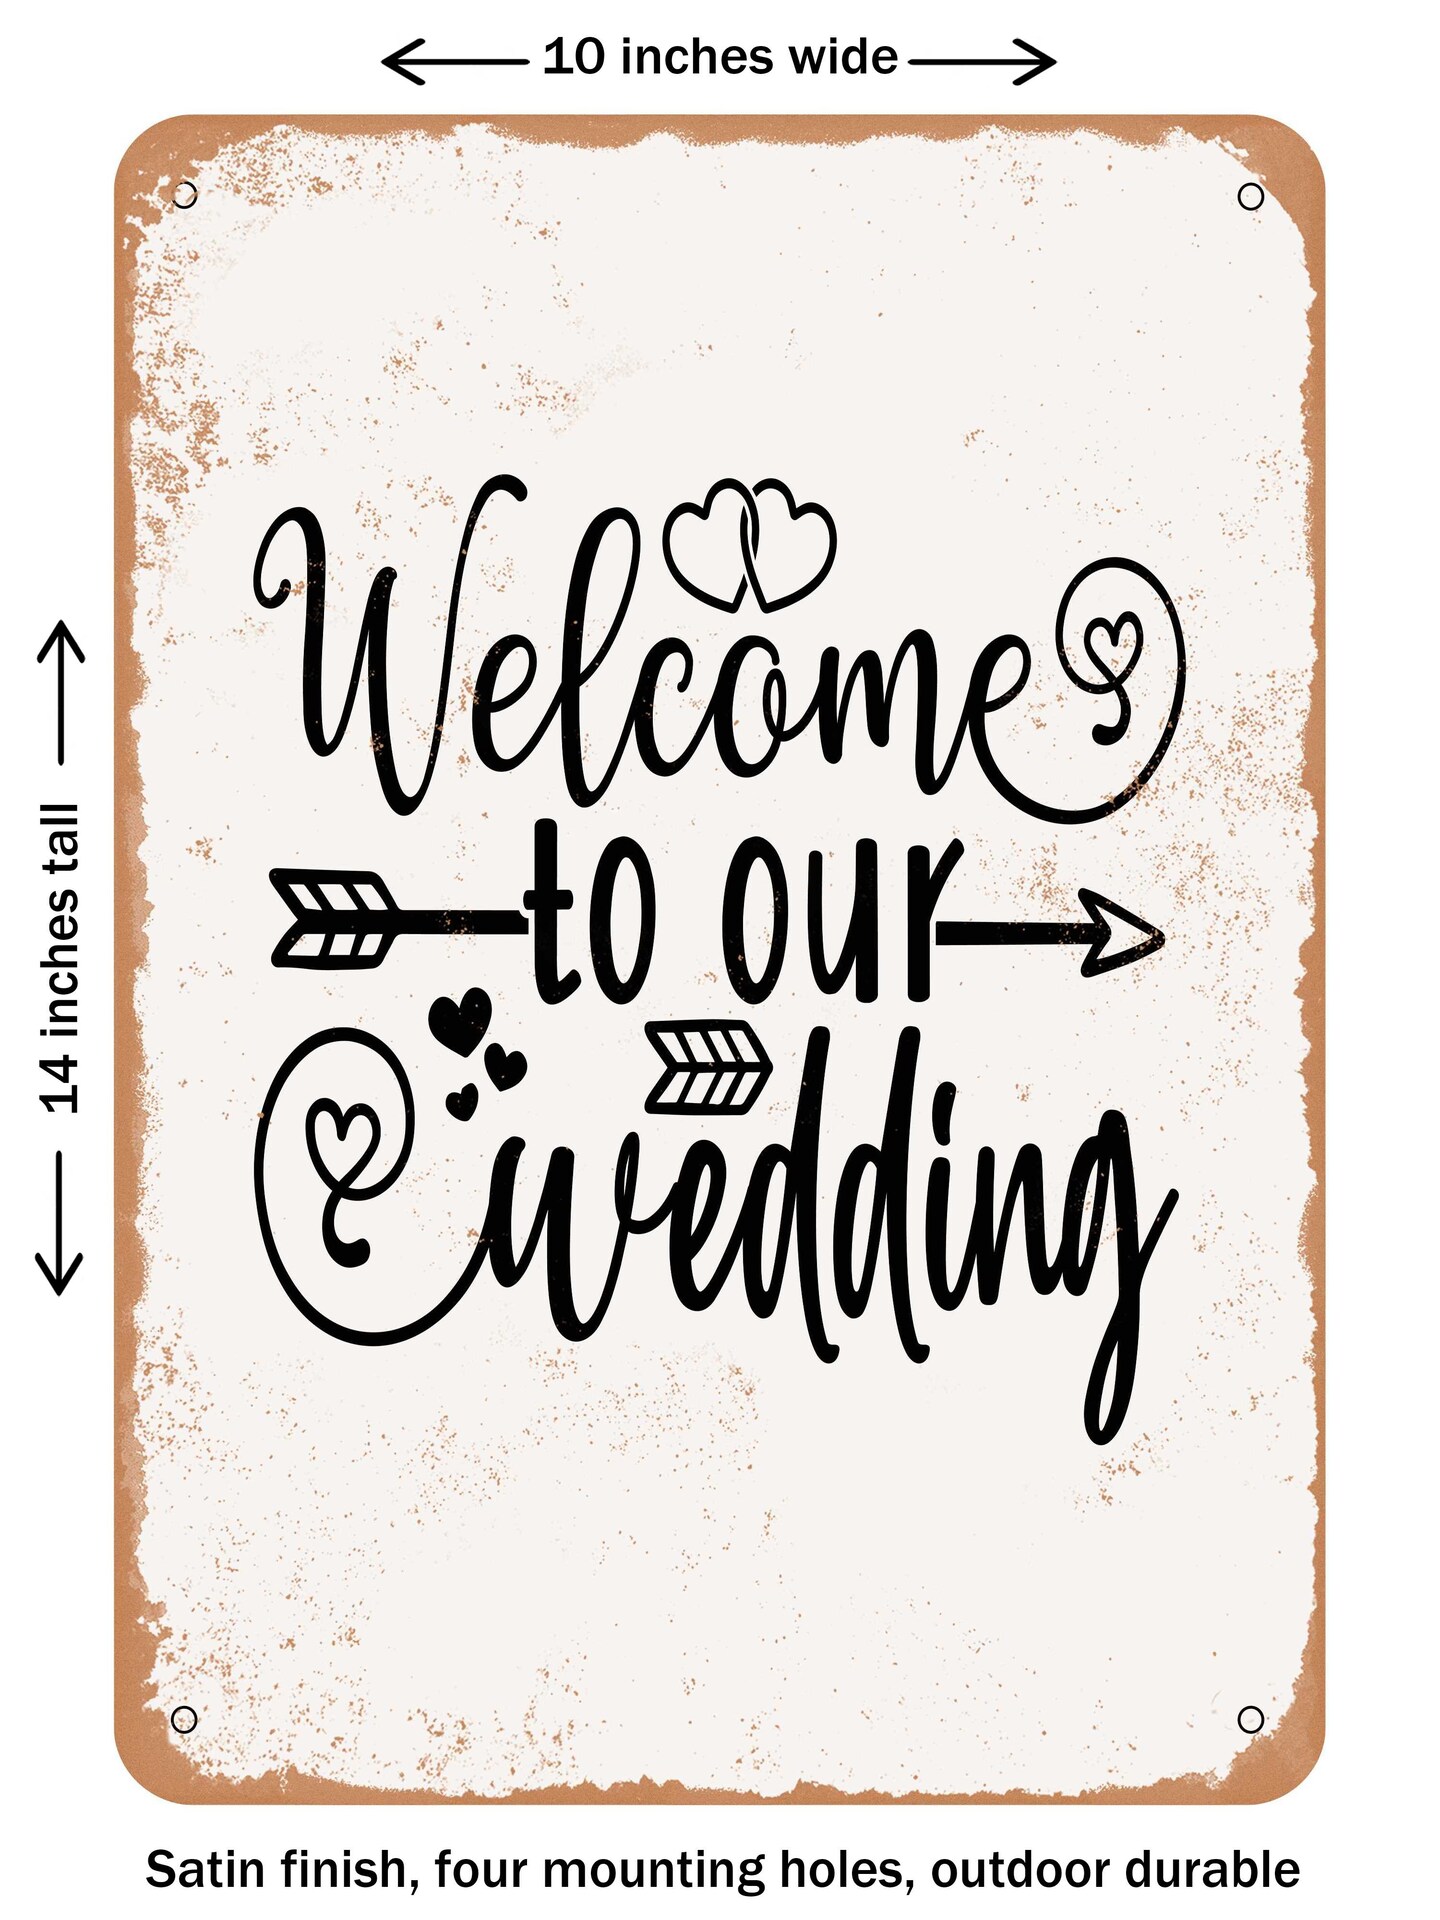 DECORATIVE METAL SIGN - Welcome to Our Our Wedding  - Vintage Rusty Look